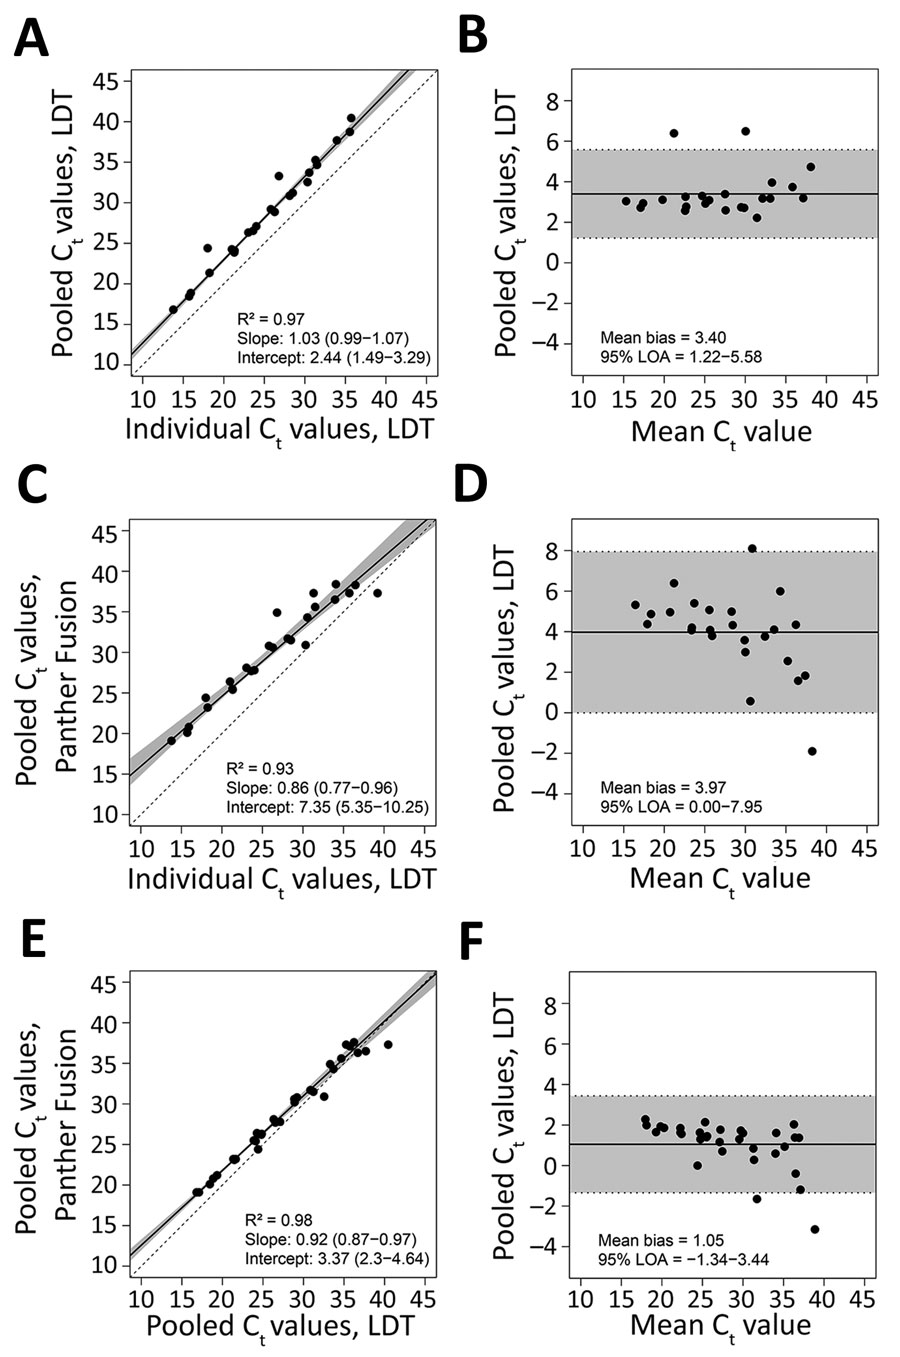 Performance of nucleic acid amplification tests for detection of severe acute respiratory syndrome coronavirus 2 in prospectively pooled specimens. Passing-Bablok regression and Bland-Altman plots for pools of 8 containing only 1 positive sample, tested by A and B) pooled LDT versus individual LDT (n = 23) (A, B); pooled Panther Fusion versus individual LDT (n = 25) (C, D); and pooled Panther Fusion versus pooled LDT (n = 32) (E, F). For the Passing-Bablok regression plots (A, C, and E), the solid line indicates the line of regression. 95% CIs are shaded in gray. The dashed line indicates the line of identity. The slope and intercept of the regression line are reported with 95% CIs in parentheses. For the Bland-Altman plots (B, D, and F), the solid line represents the mean difference in Ct value. 95% limits of agreement are shaded in gray. Panther Fusion is from Hologic (https://www.hologic.com). Ct, cycle threshold; LDT, laboratory-developed test; LOA, limits of agreement.